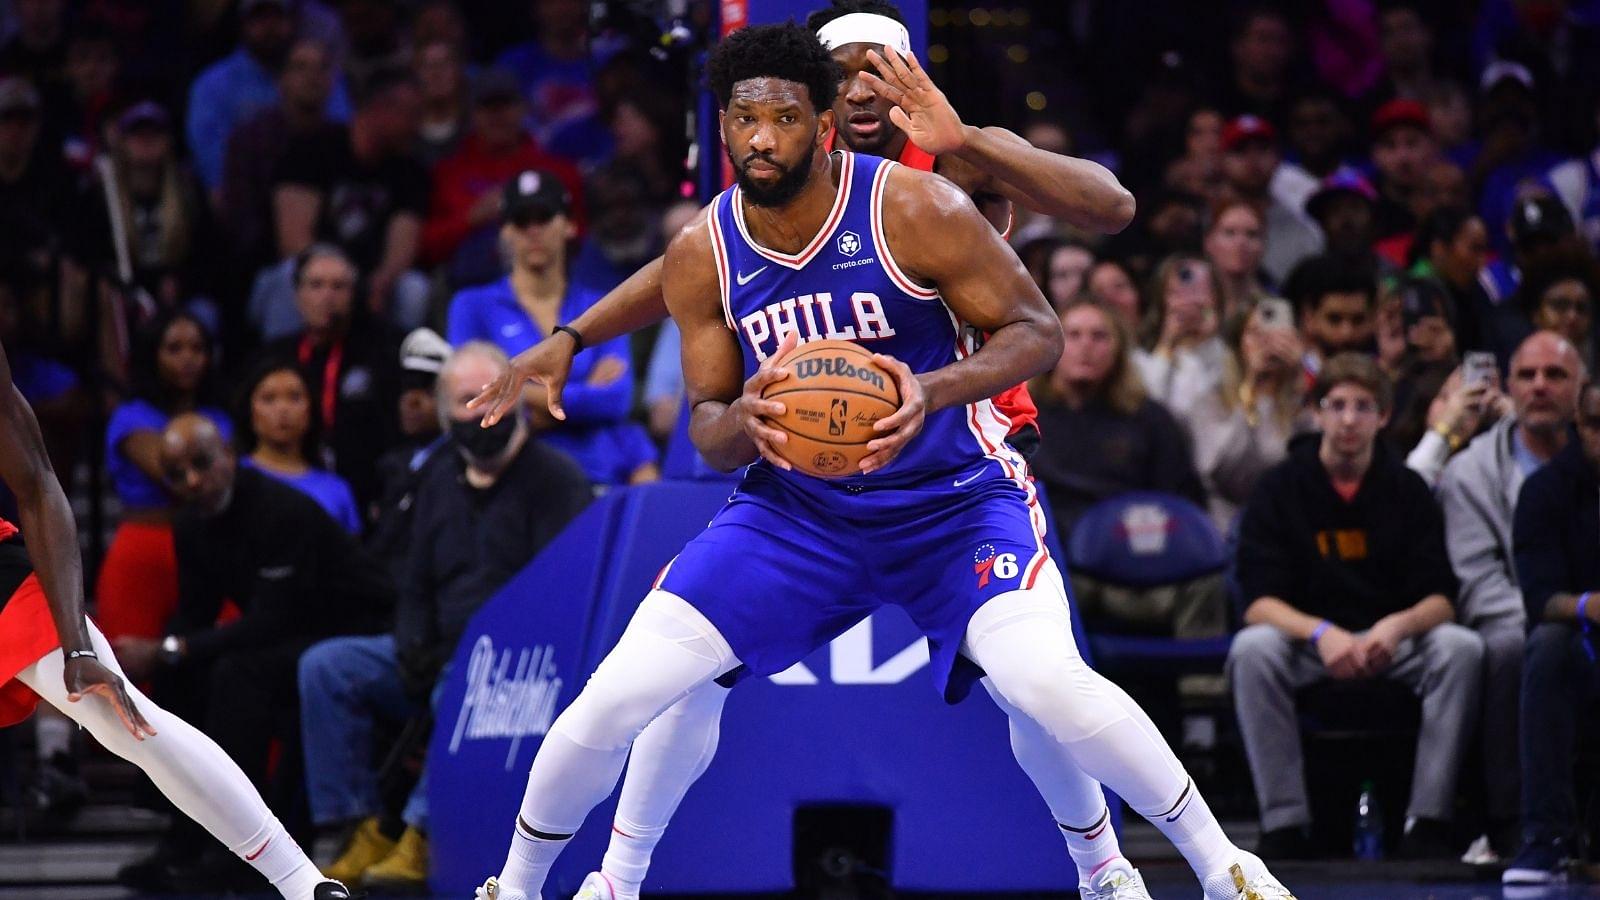 "The best basketball player doesn't have to be an American anymore": Joel Embiid hints at foreign players taking over the league as top players